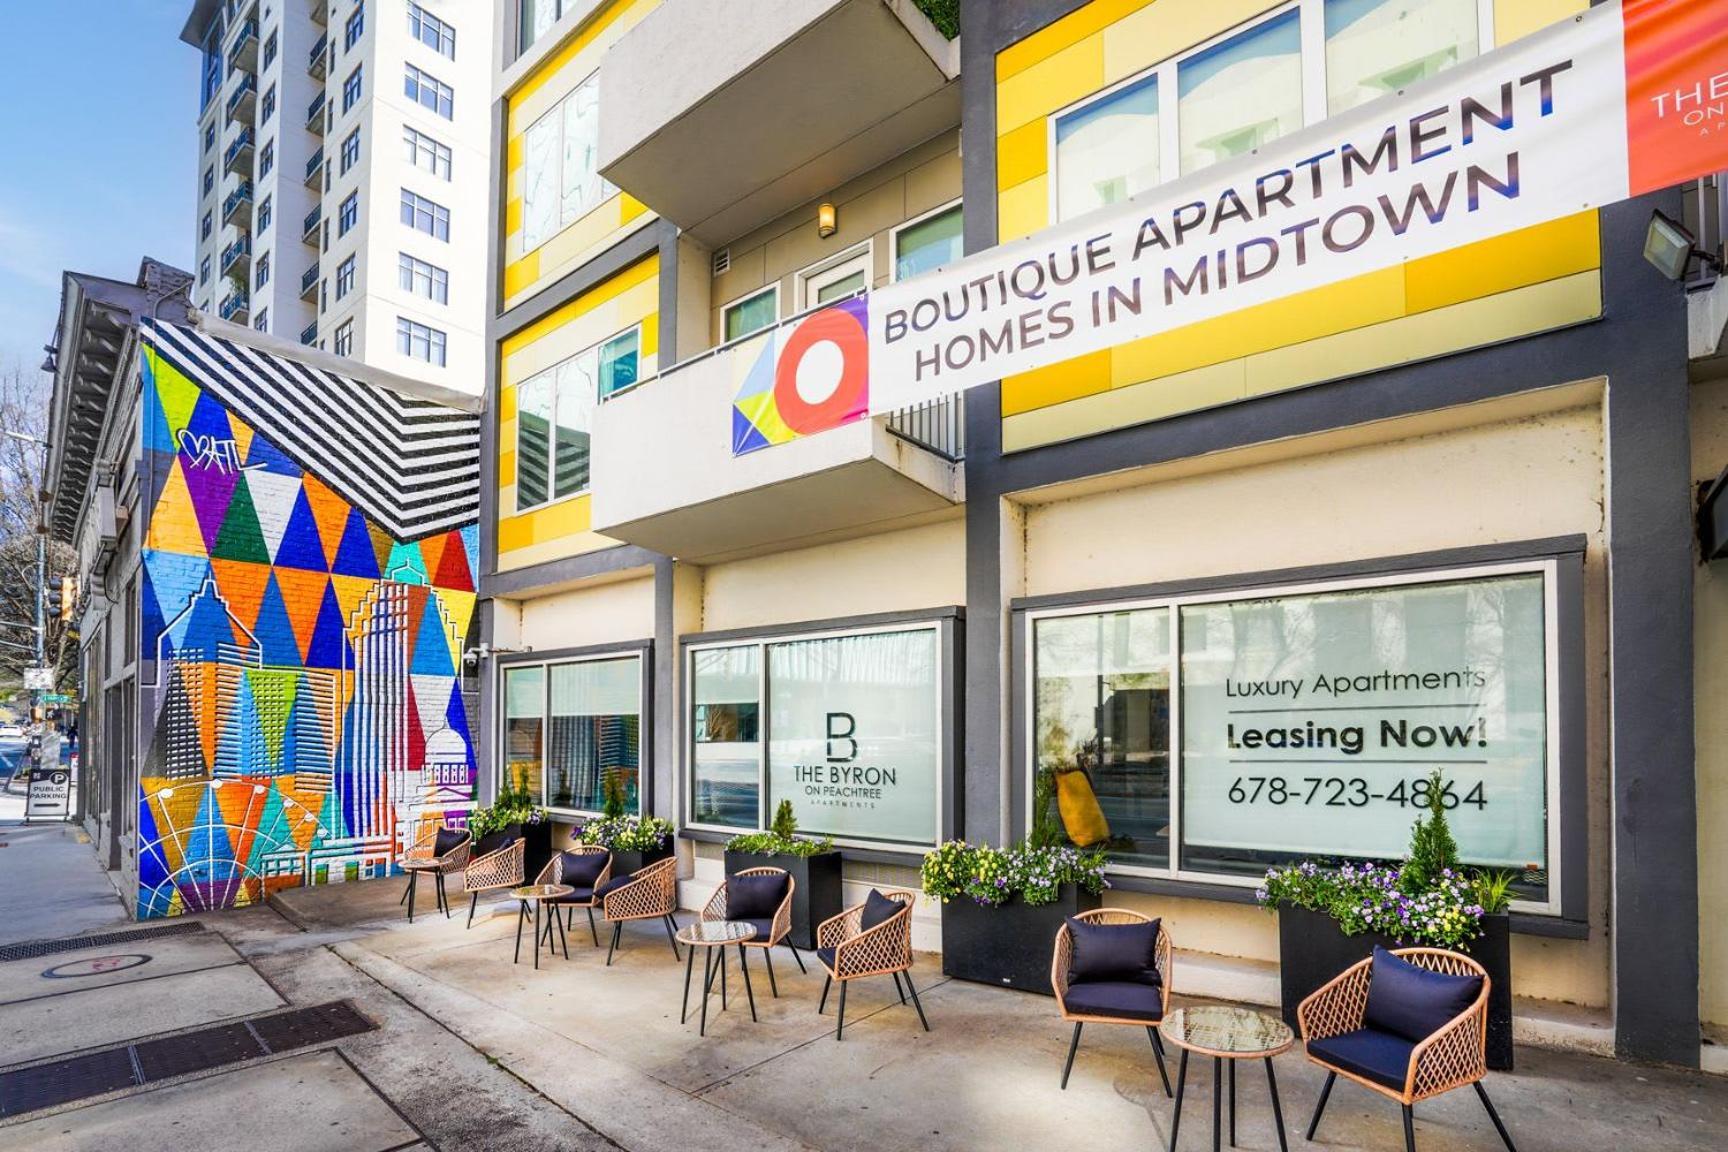 Stylish City Living Apartments With Free Parking In Midtown แอตแลนตา ภายนอก รูปภาพ